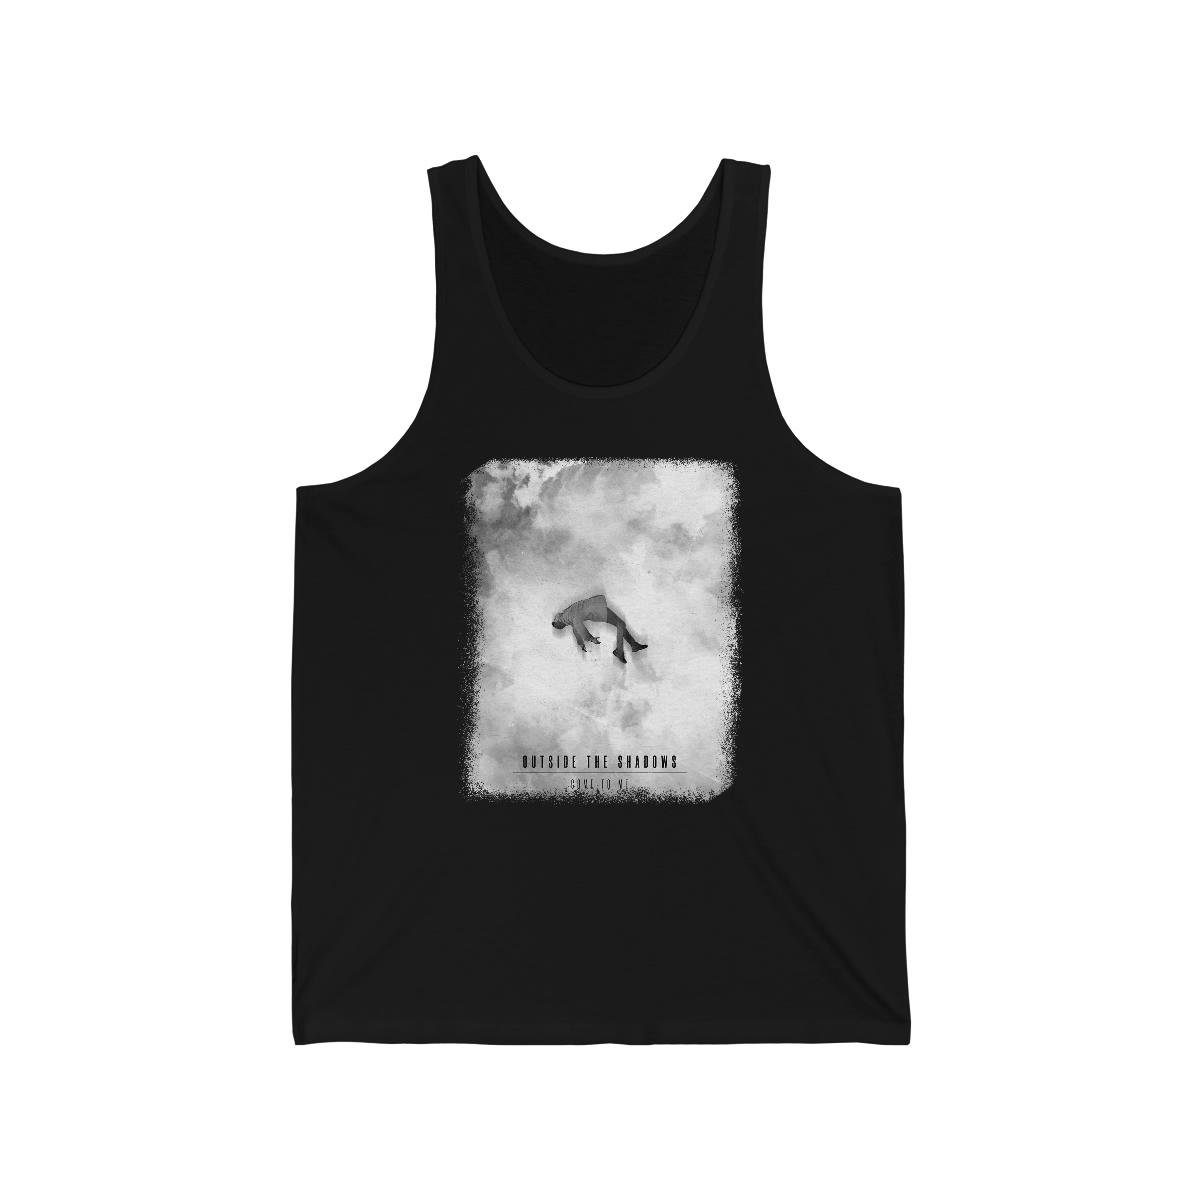 Outside the Shadows – Come To Me BW Unisex Jersey Tank